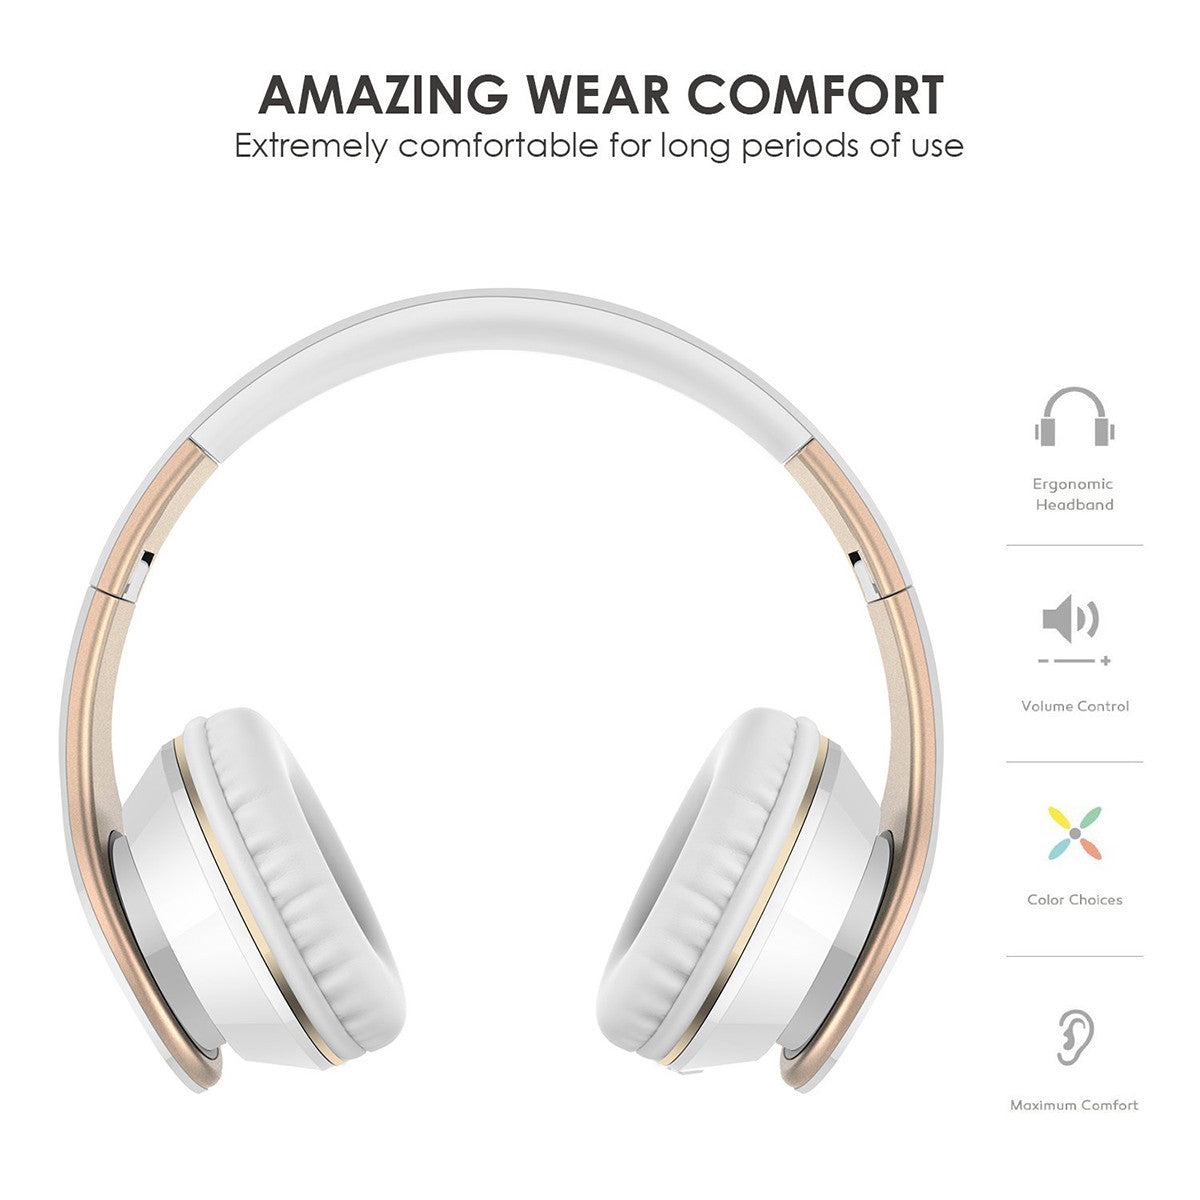 Sound HW50 Stereo Folding Headsets